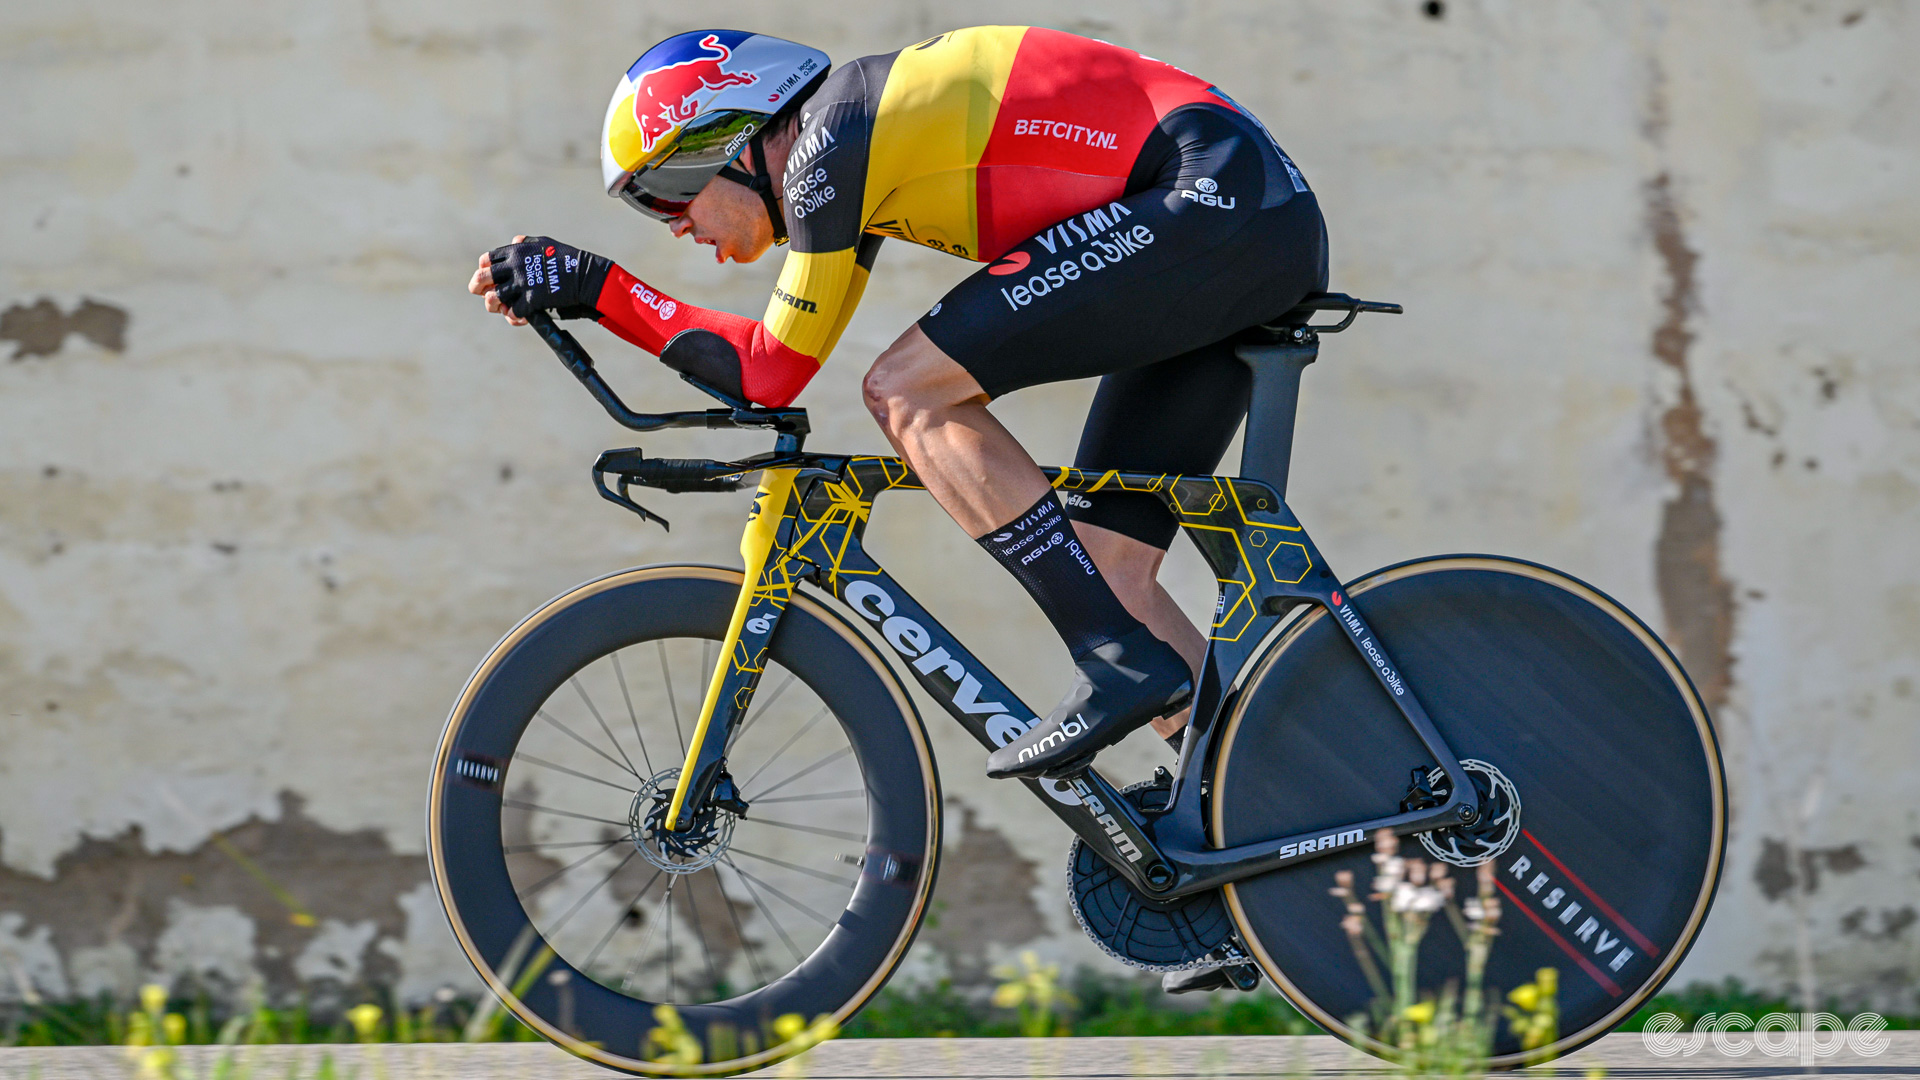 The photo shows Wout van Aert racing on what appears to be a new Cervelo P5.
